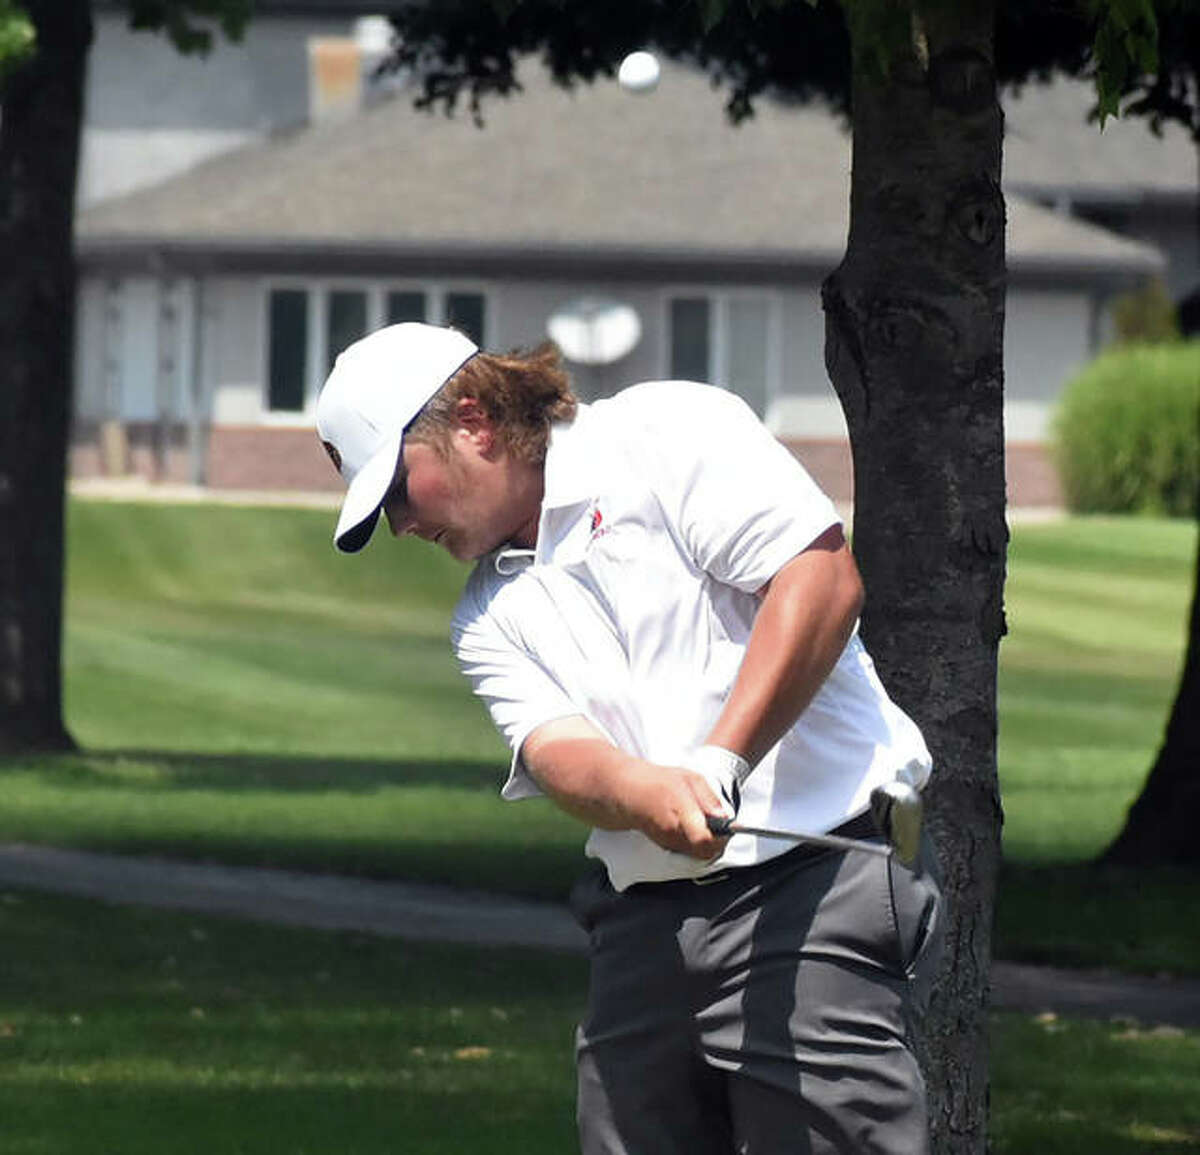 Alton’s Alec Schmieder hits a shot during Wednesday’s Madison County Meet at Belk Park in Wood River. On Saturday, Schmieder and the Redbirds were at the Quincy Invite and Alton placed ninth at Westview golf course.